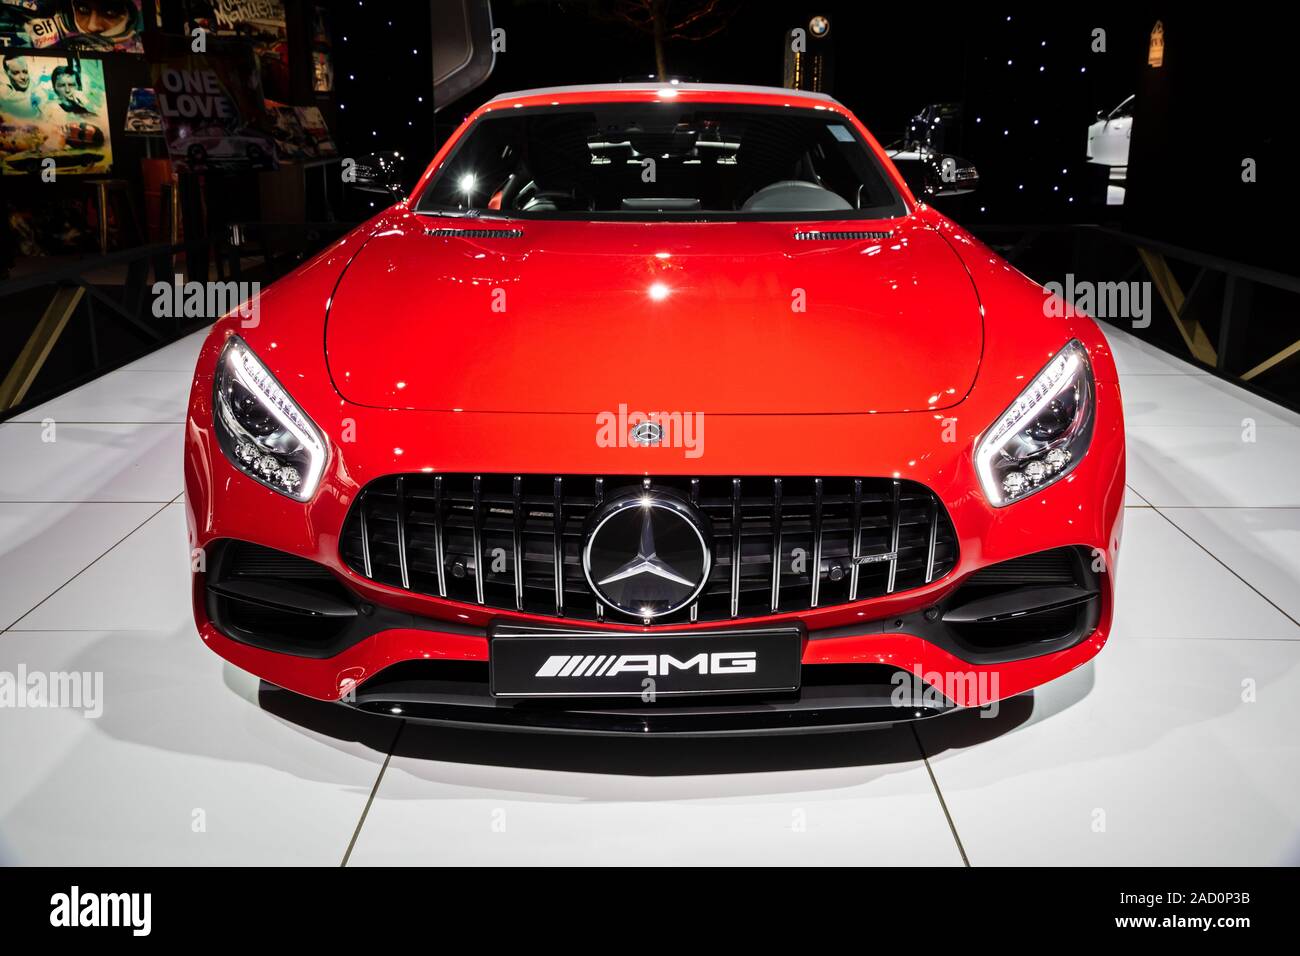 BRUSSELS - JAN 18, 2019: Mercedes-AMG GT C Roadster sports car  showcased at the Brussels Autosalon 2019 Motor Show. Stock Photo